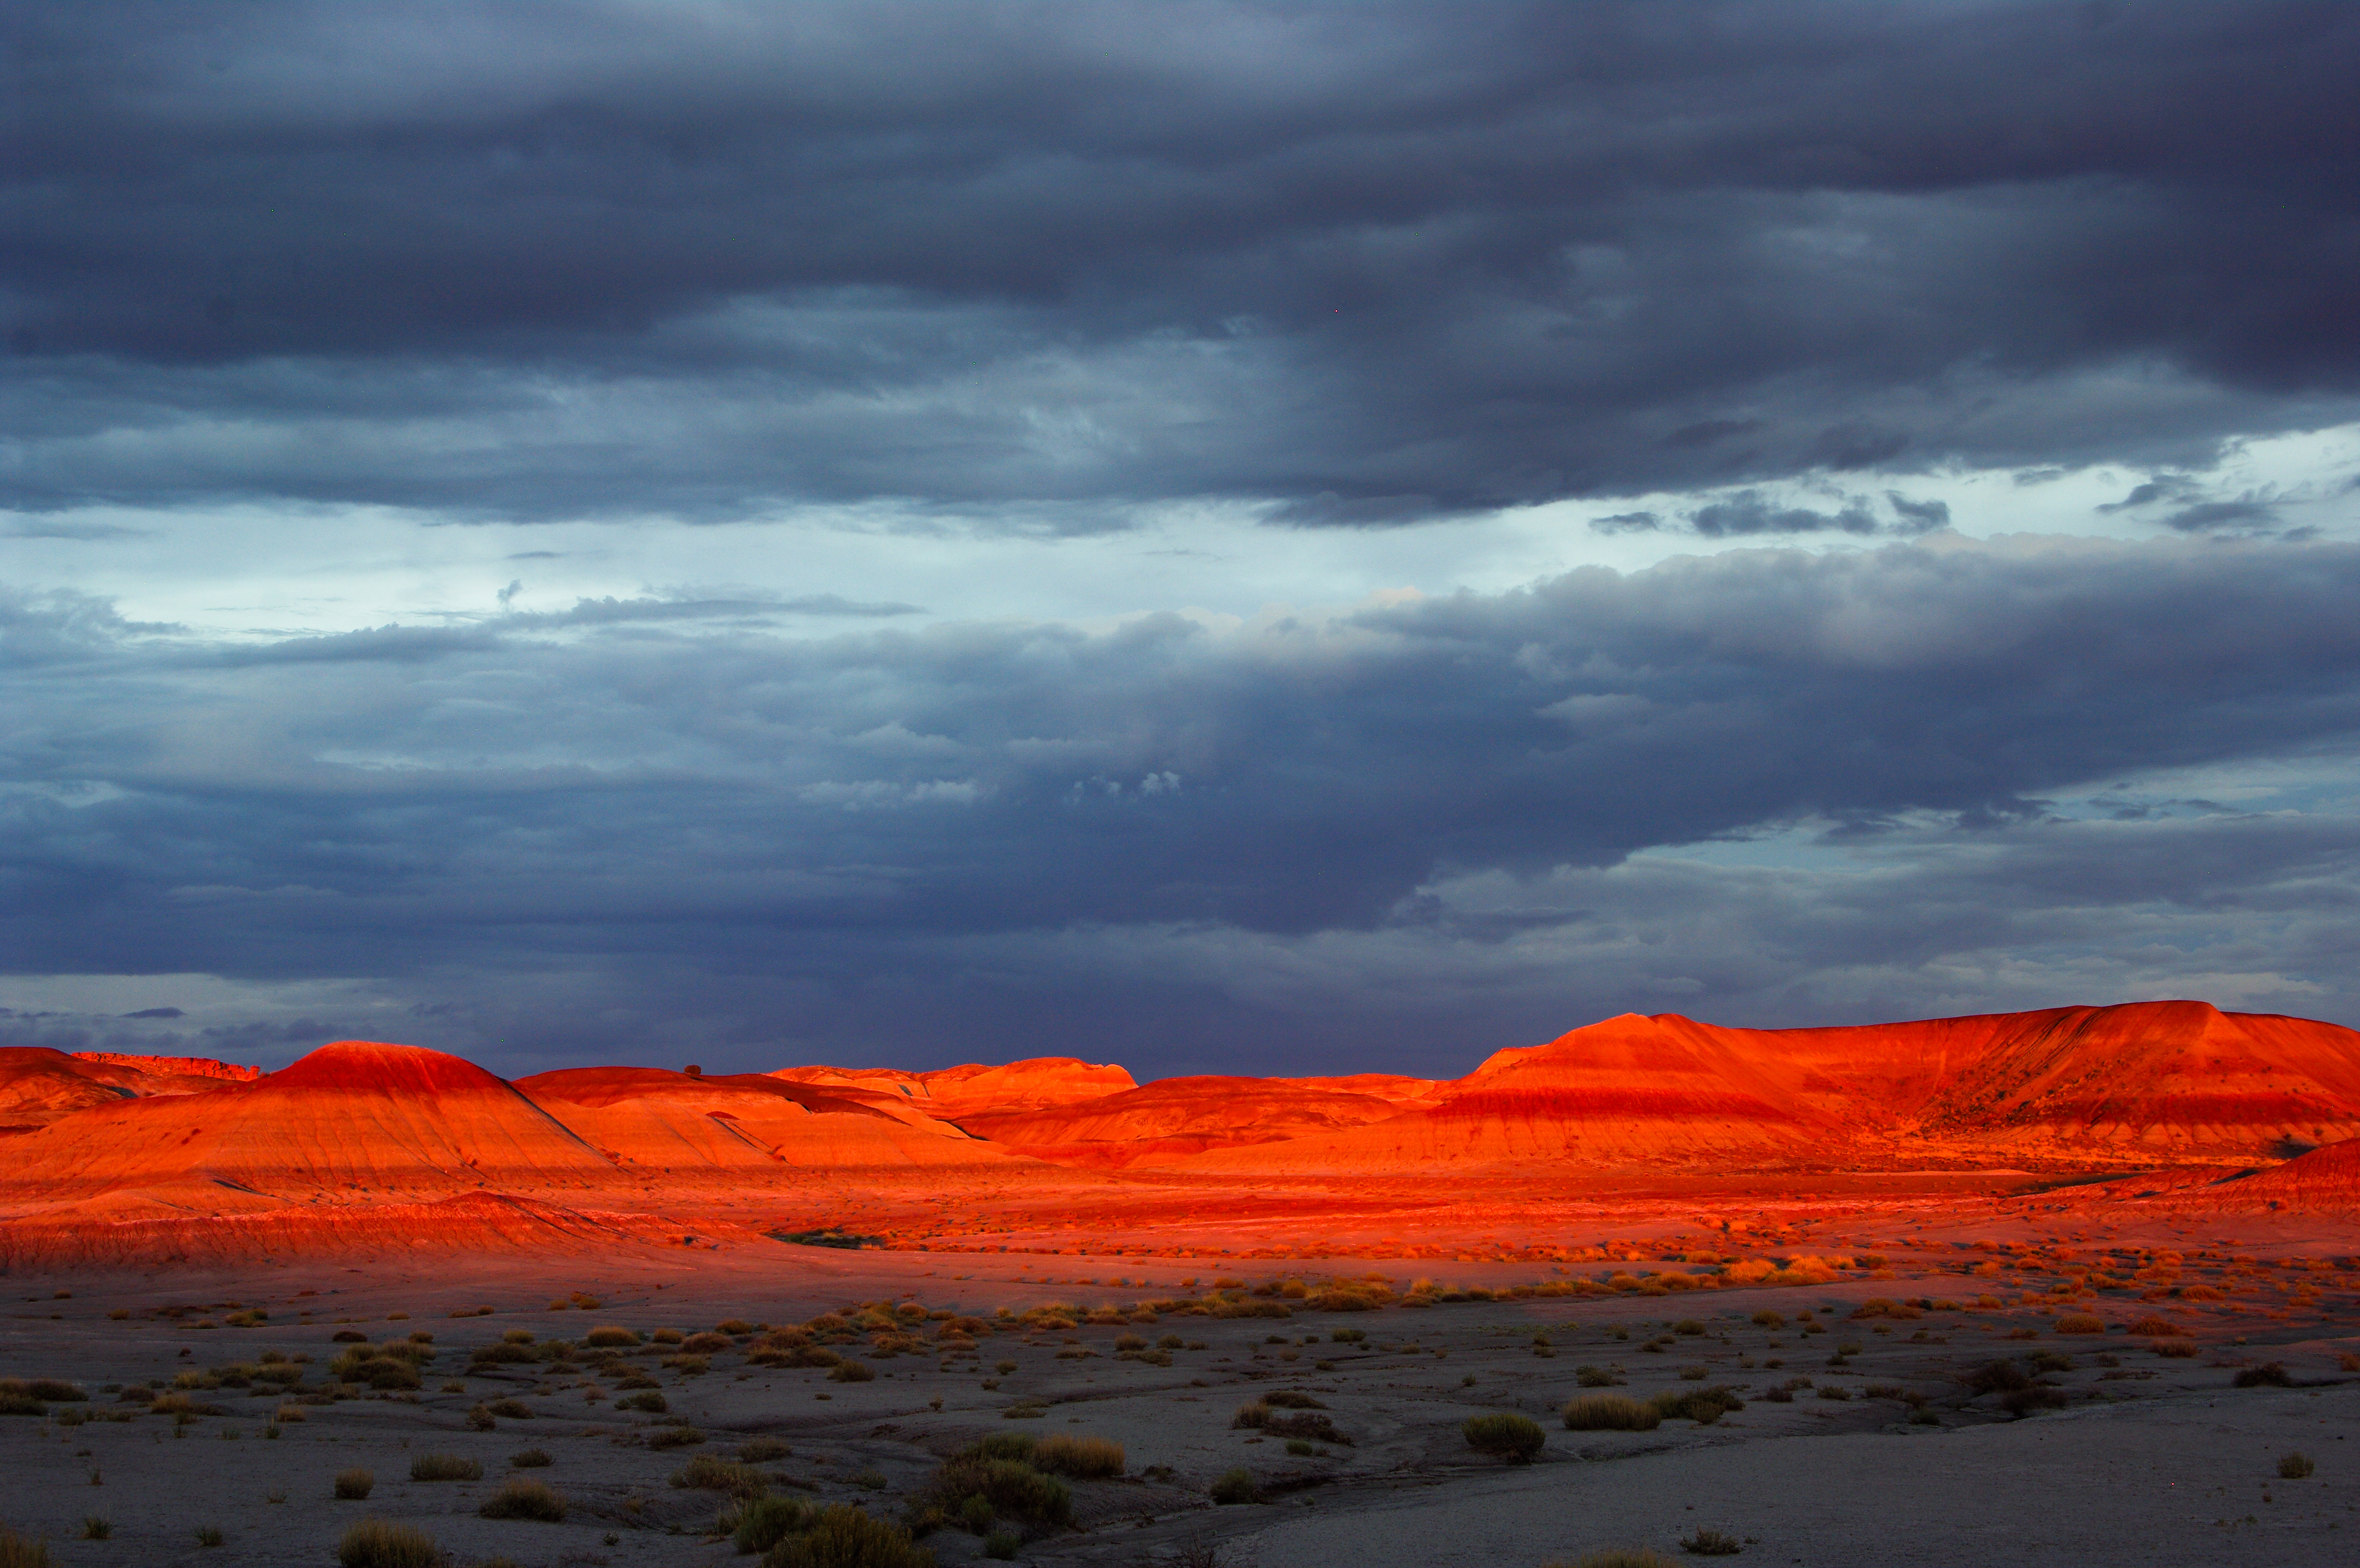 striped badlands glow red in the sunset light at the Tepees